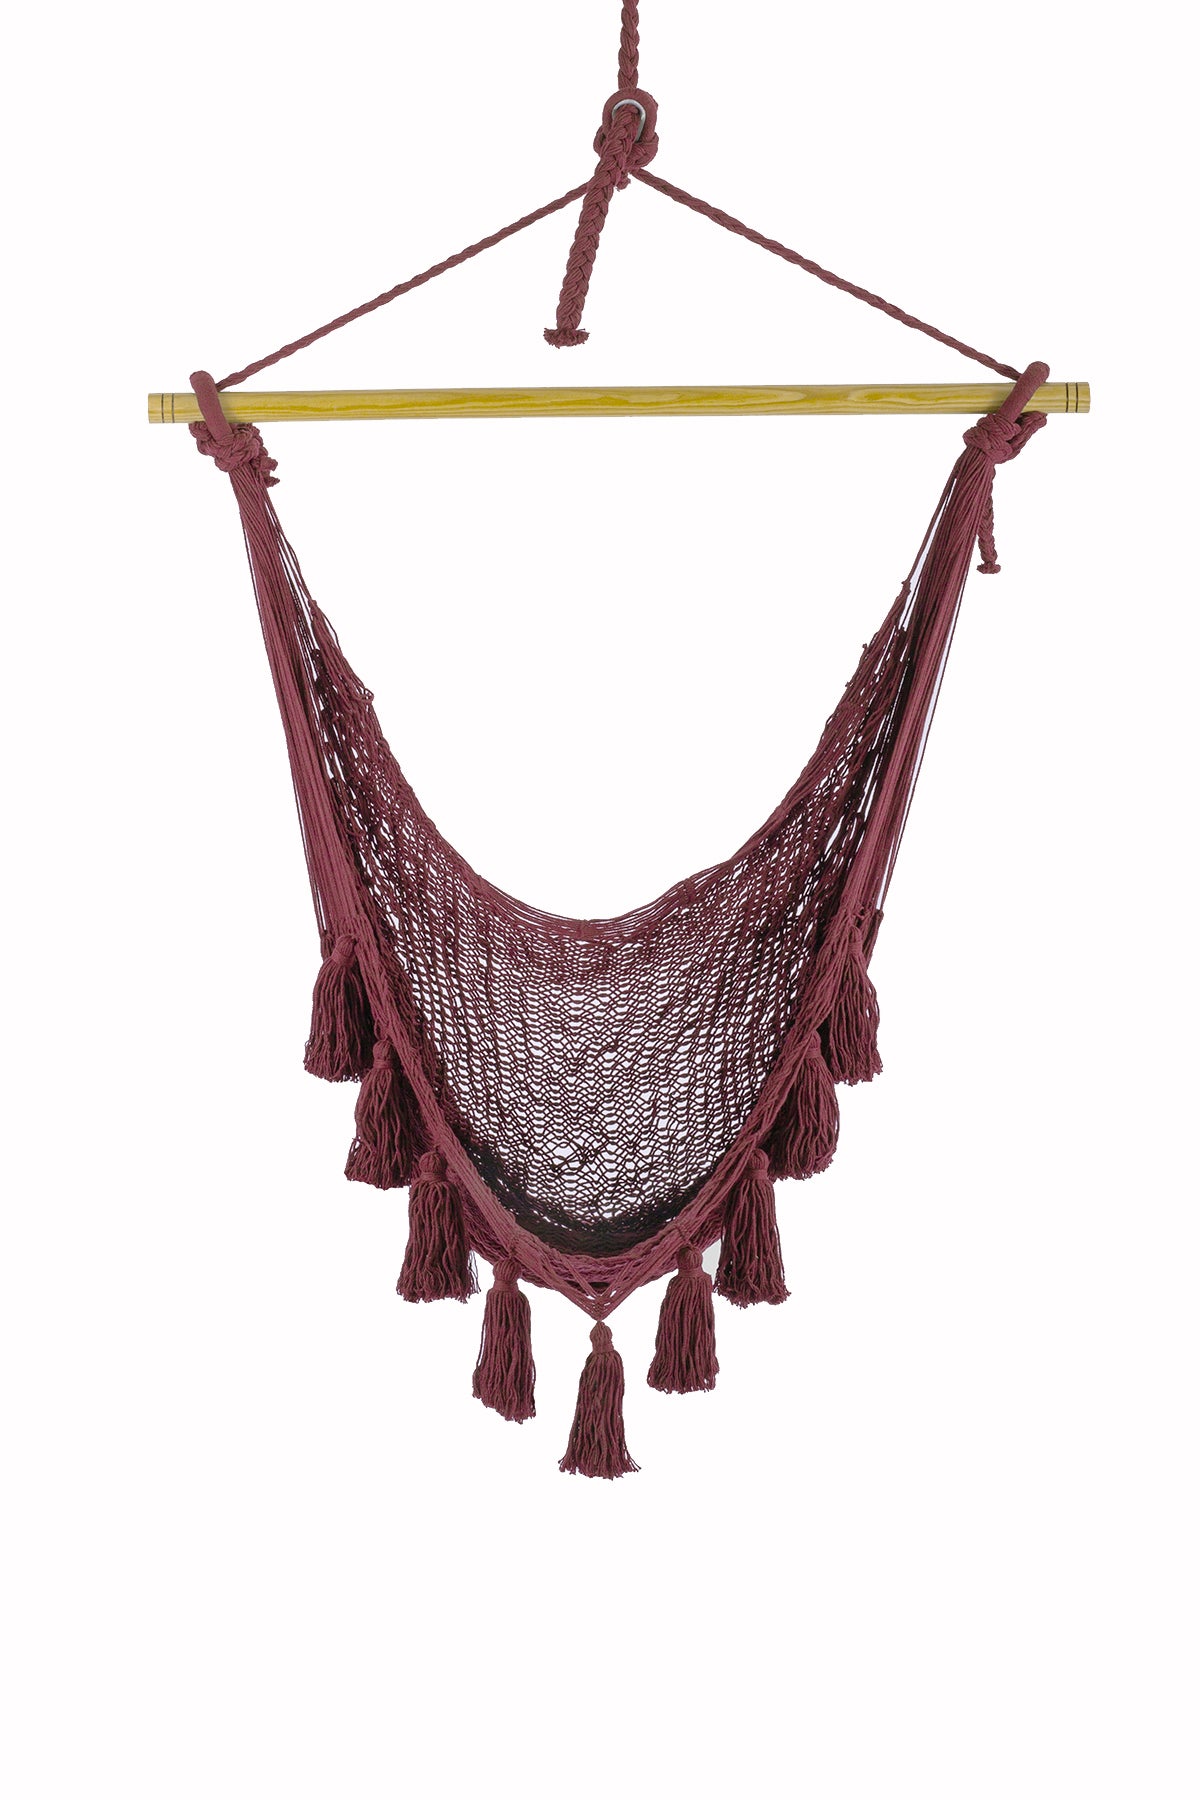 Marron Cotton Mexican Hammock swing from Mexico, "Marron Swing Chair"